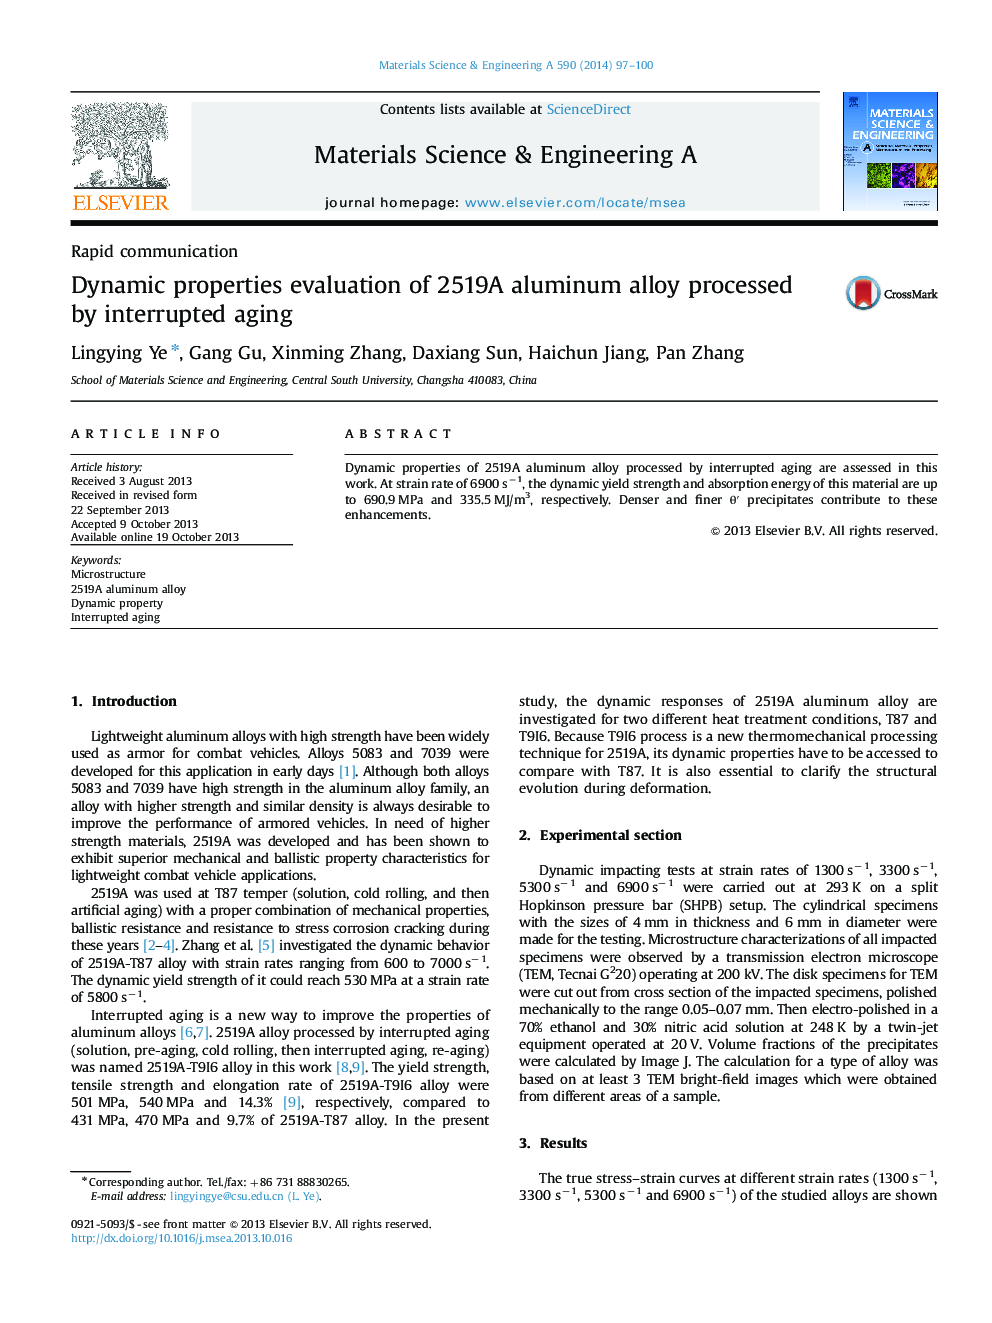 Dynamic properties evaluation of 2519A aluminum alloy processed by interrupted aging